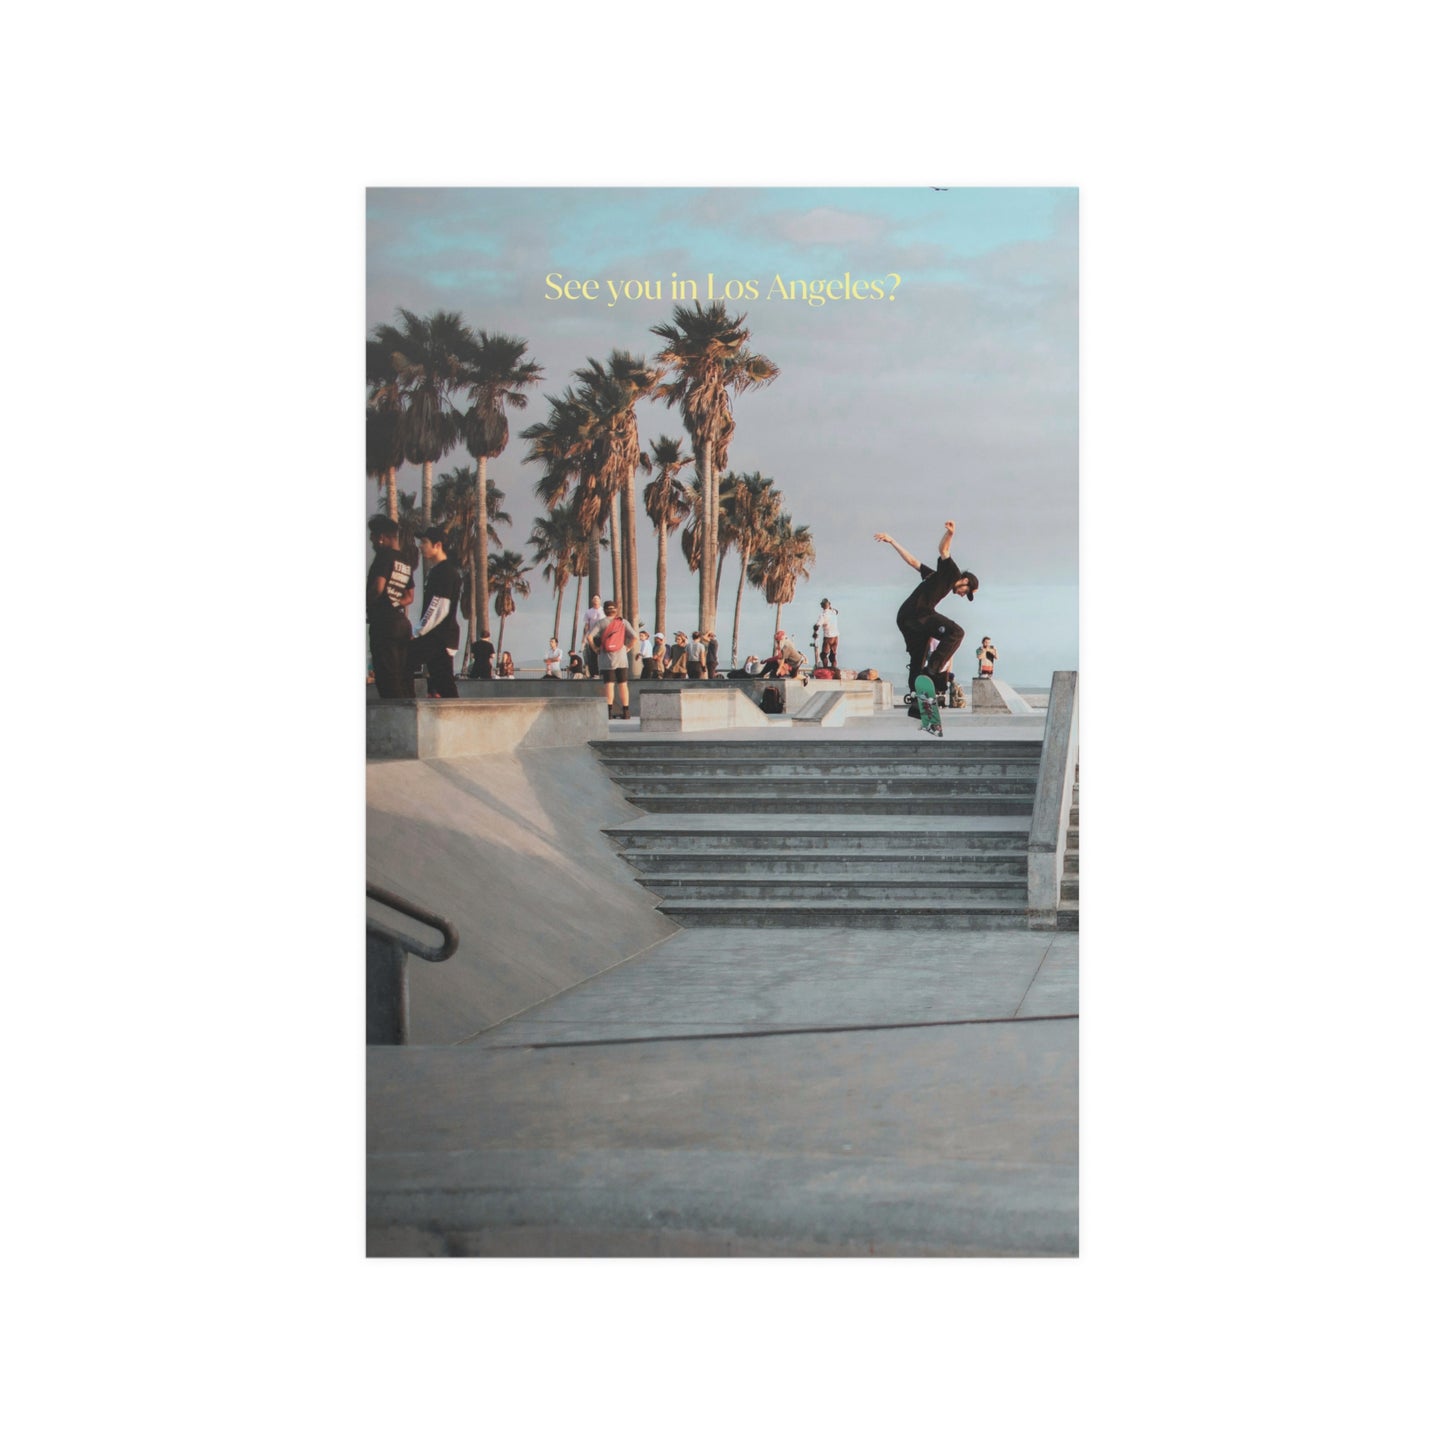 Los Angeles: Travel Photography Poster